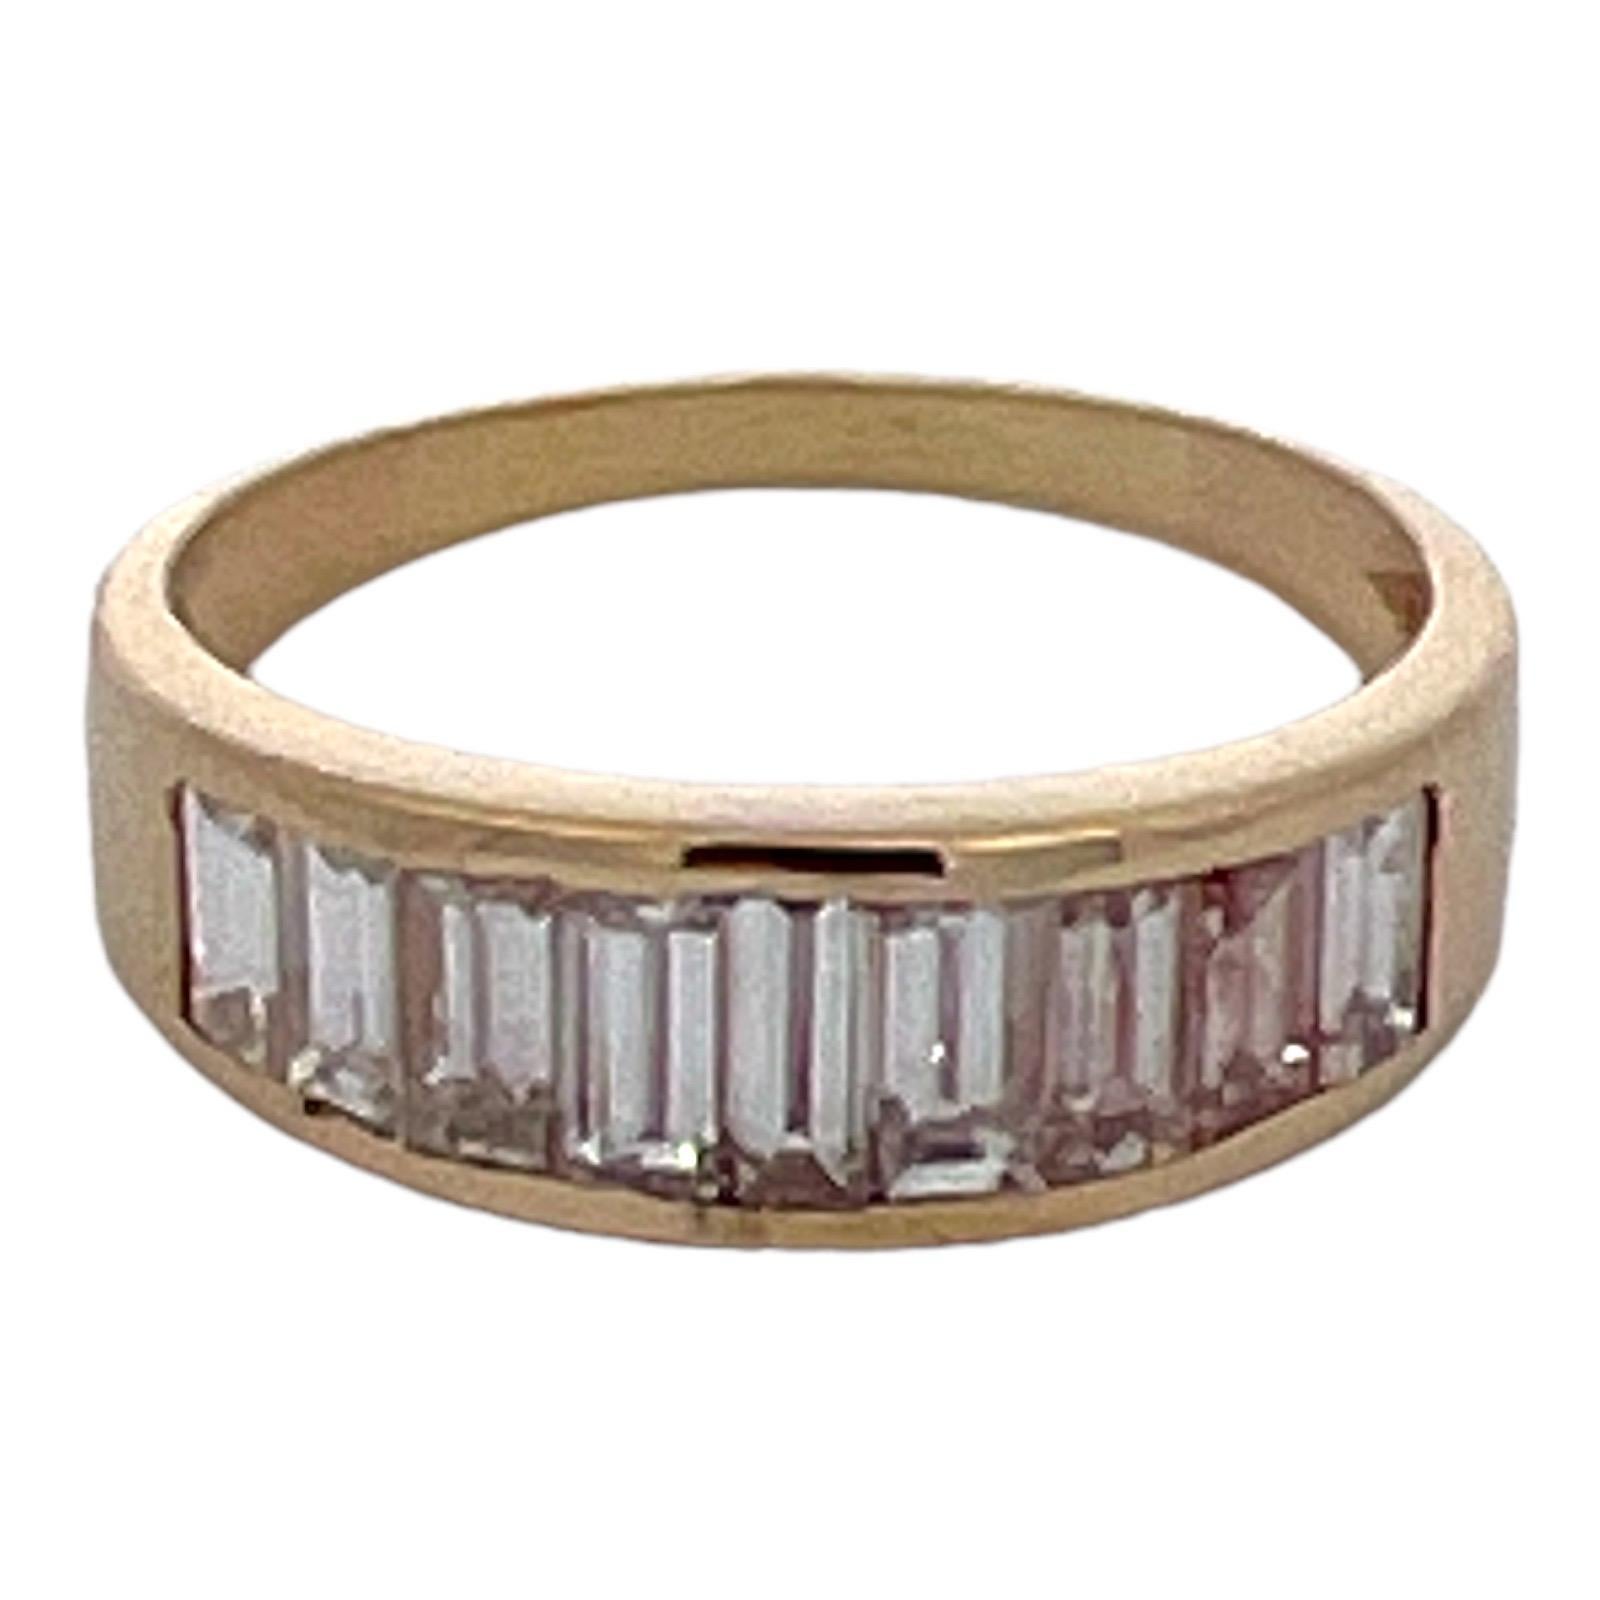 Baguette diamond channel set wedding band crafted in 14 karat yellow gold. The band features 9 baguette diamonds weighing approximately 2.00 carat total weight and graded I color and VS clarity. The graduated band measures 2.0 -6.5mm in width, and